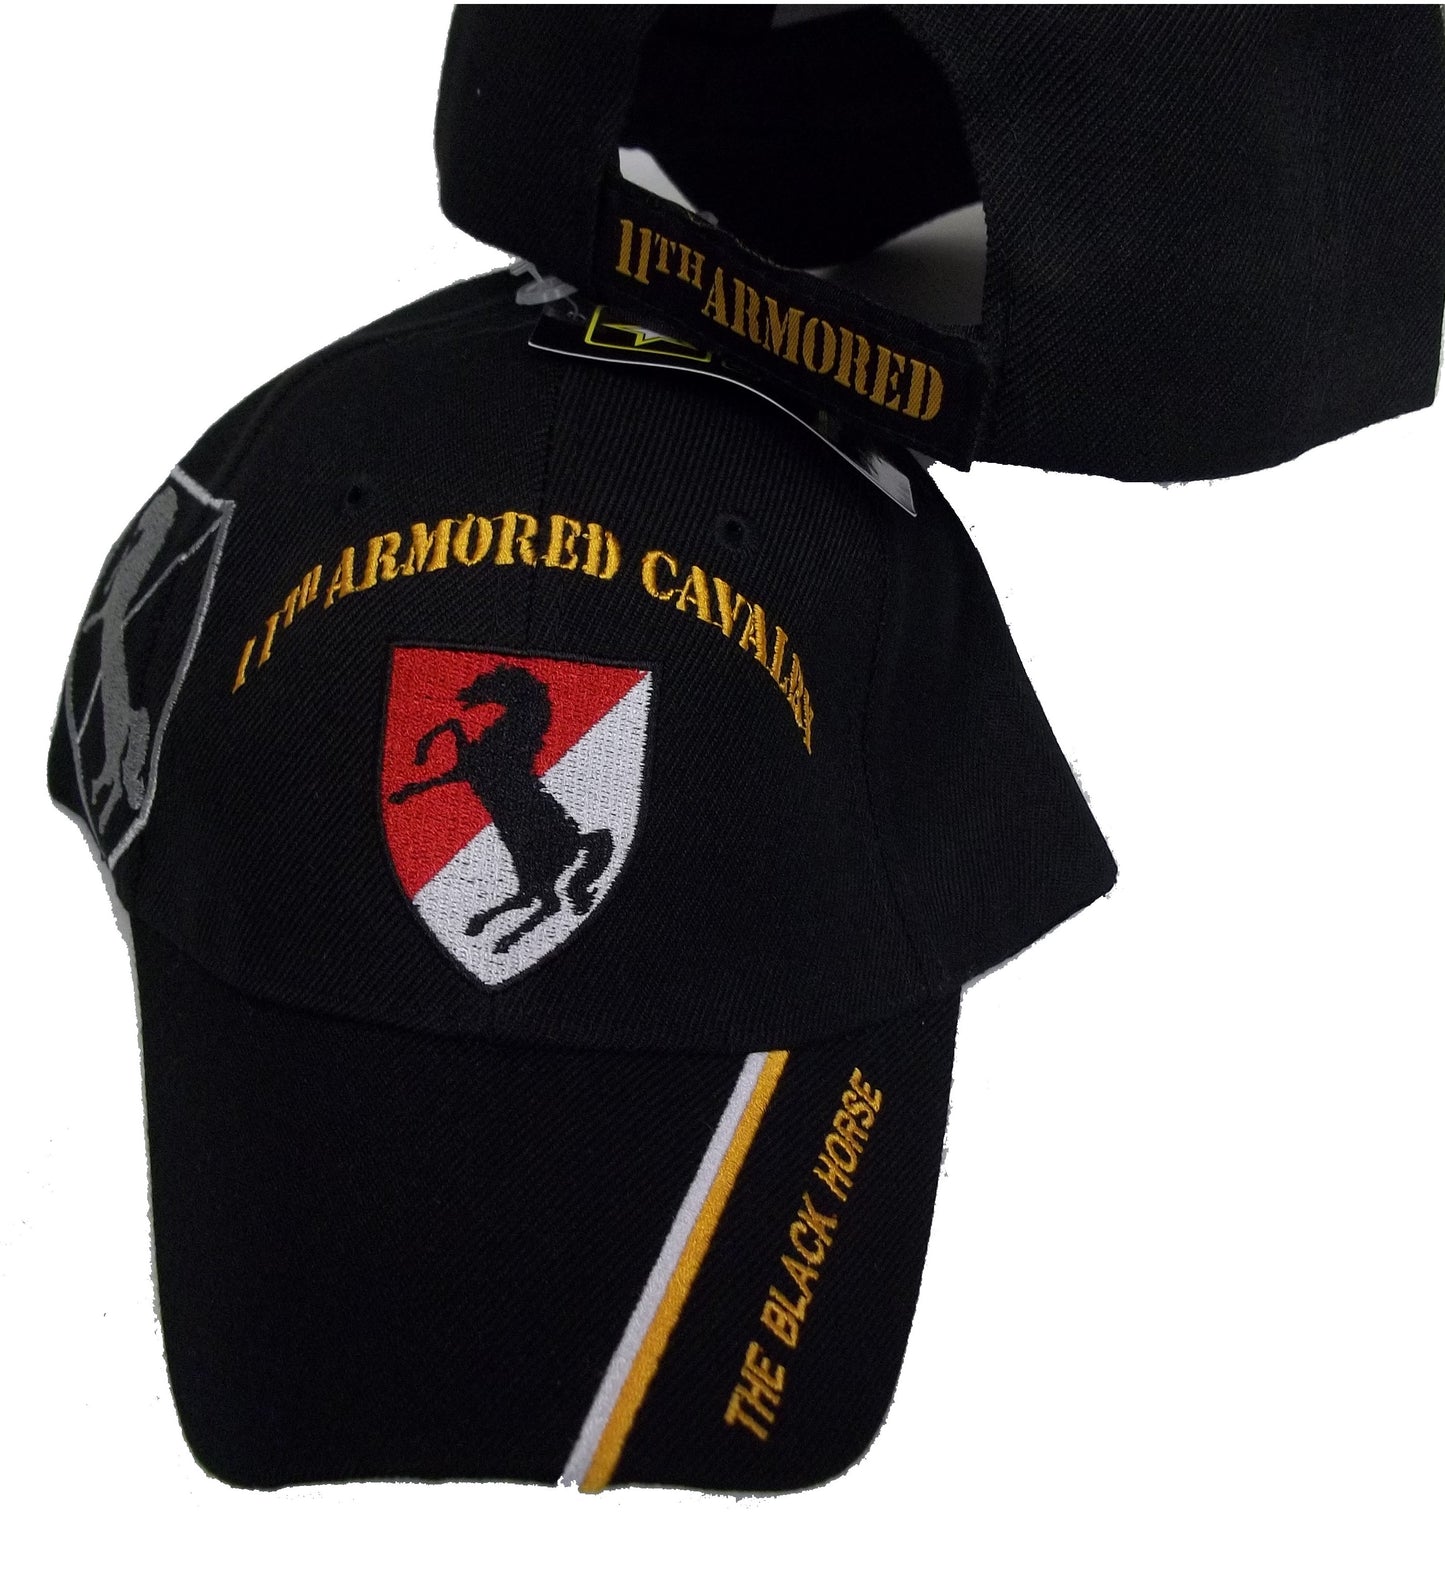 11th ARMORED CAVALRY BLACK HORSE BASEBALL STYLE EMBROIDERED HAT usa army cap